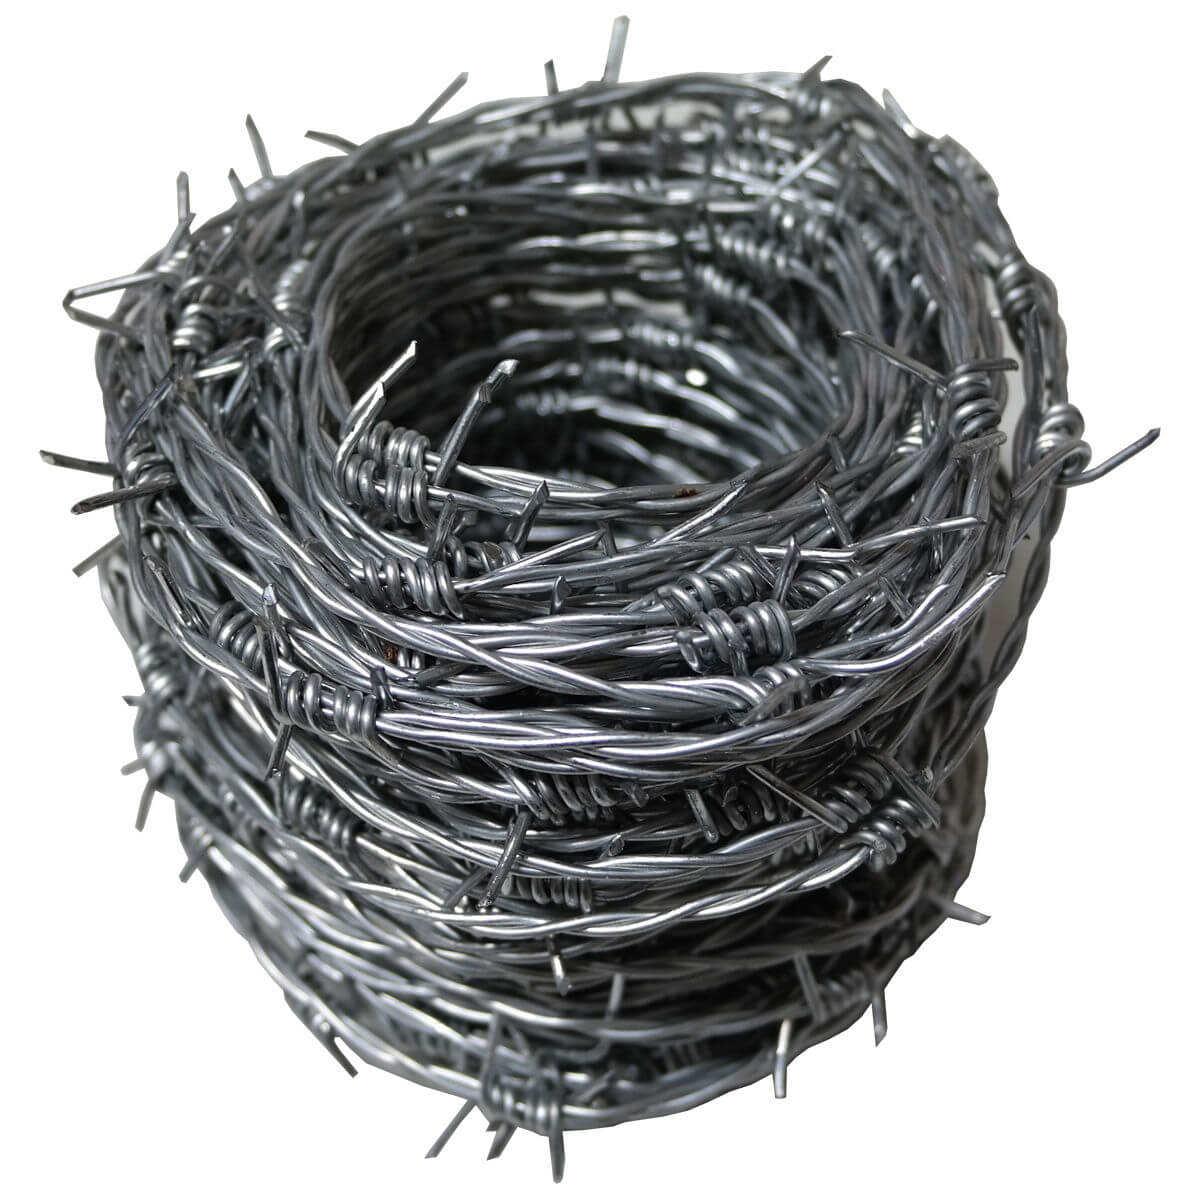 The Safety Solution: Barbed Wire Fencing for Ultimate Security